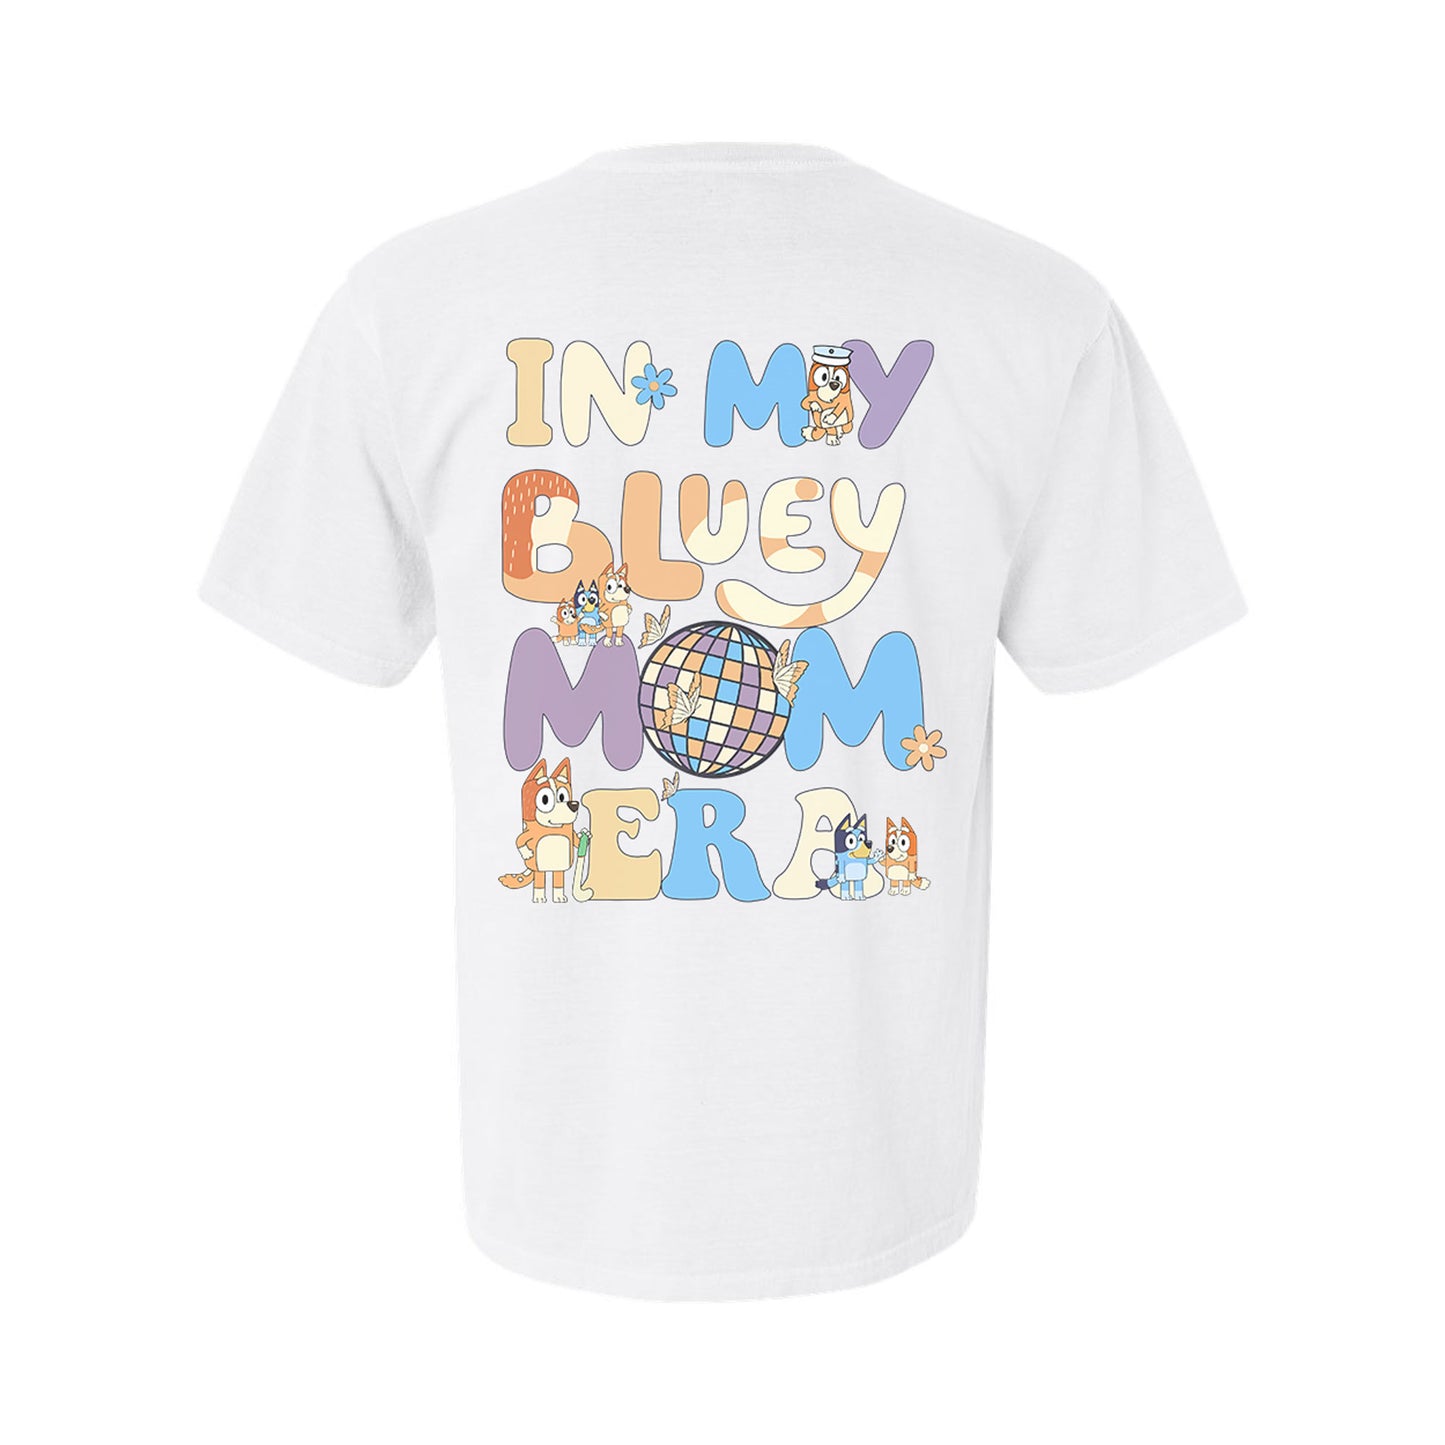 back of a white comfort colors tee with a in my blue mom era printed design